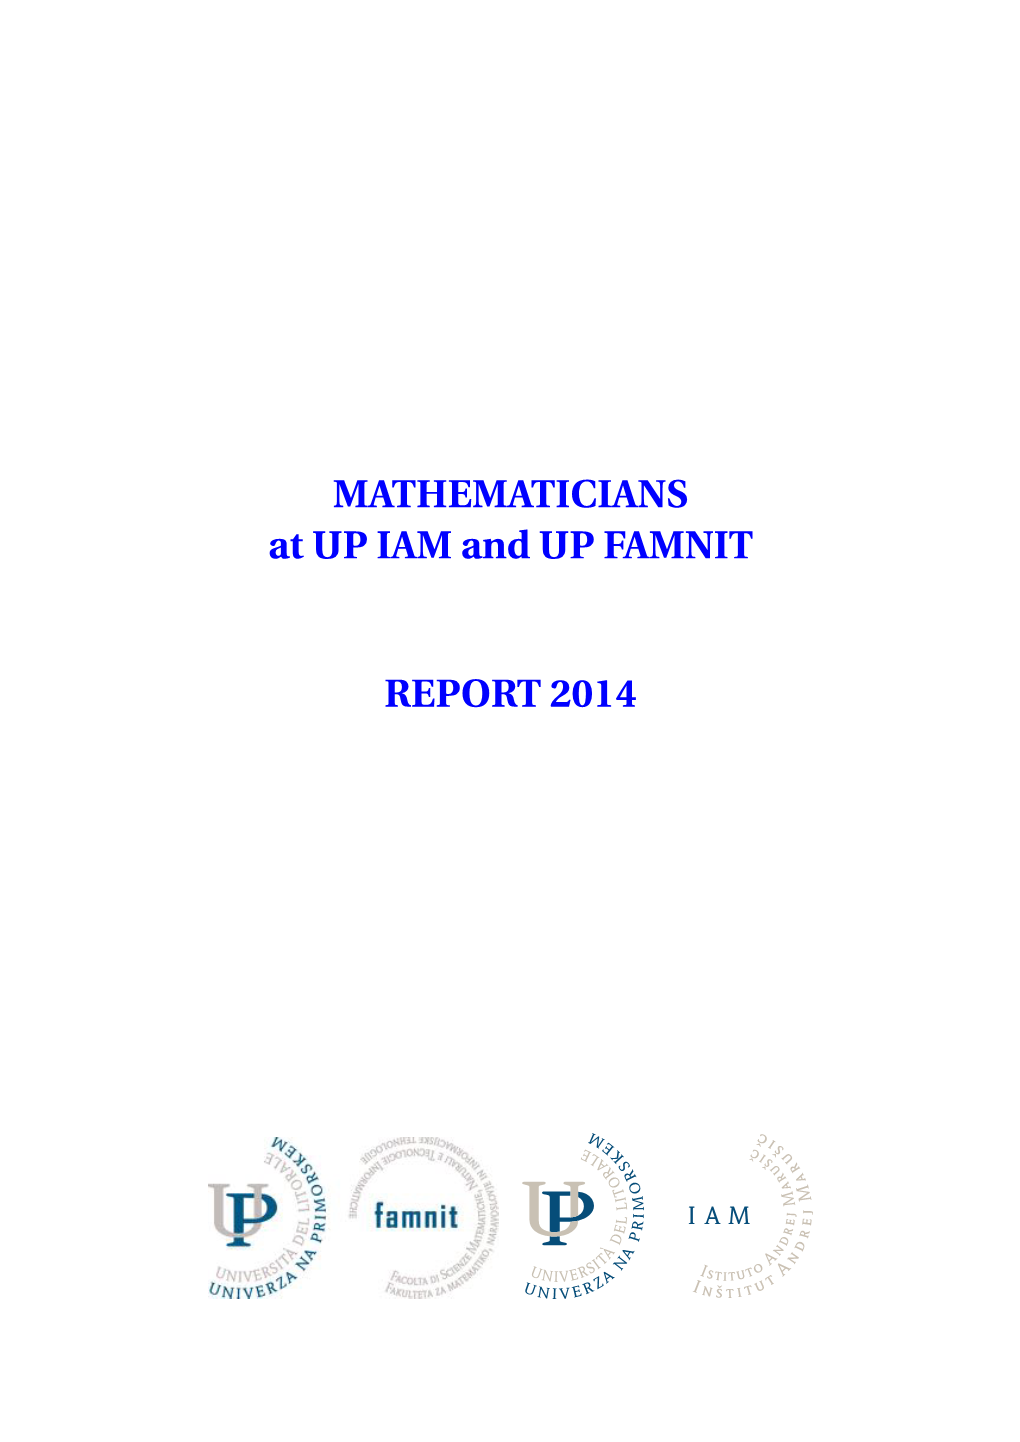 MATHEMATICIANS at up IAM and up FAMNIT REPORT 2014